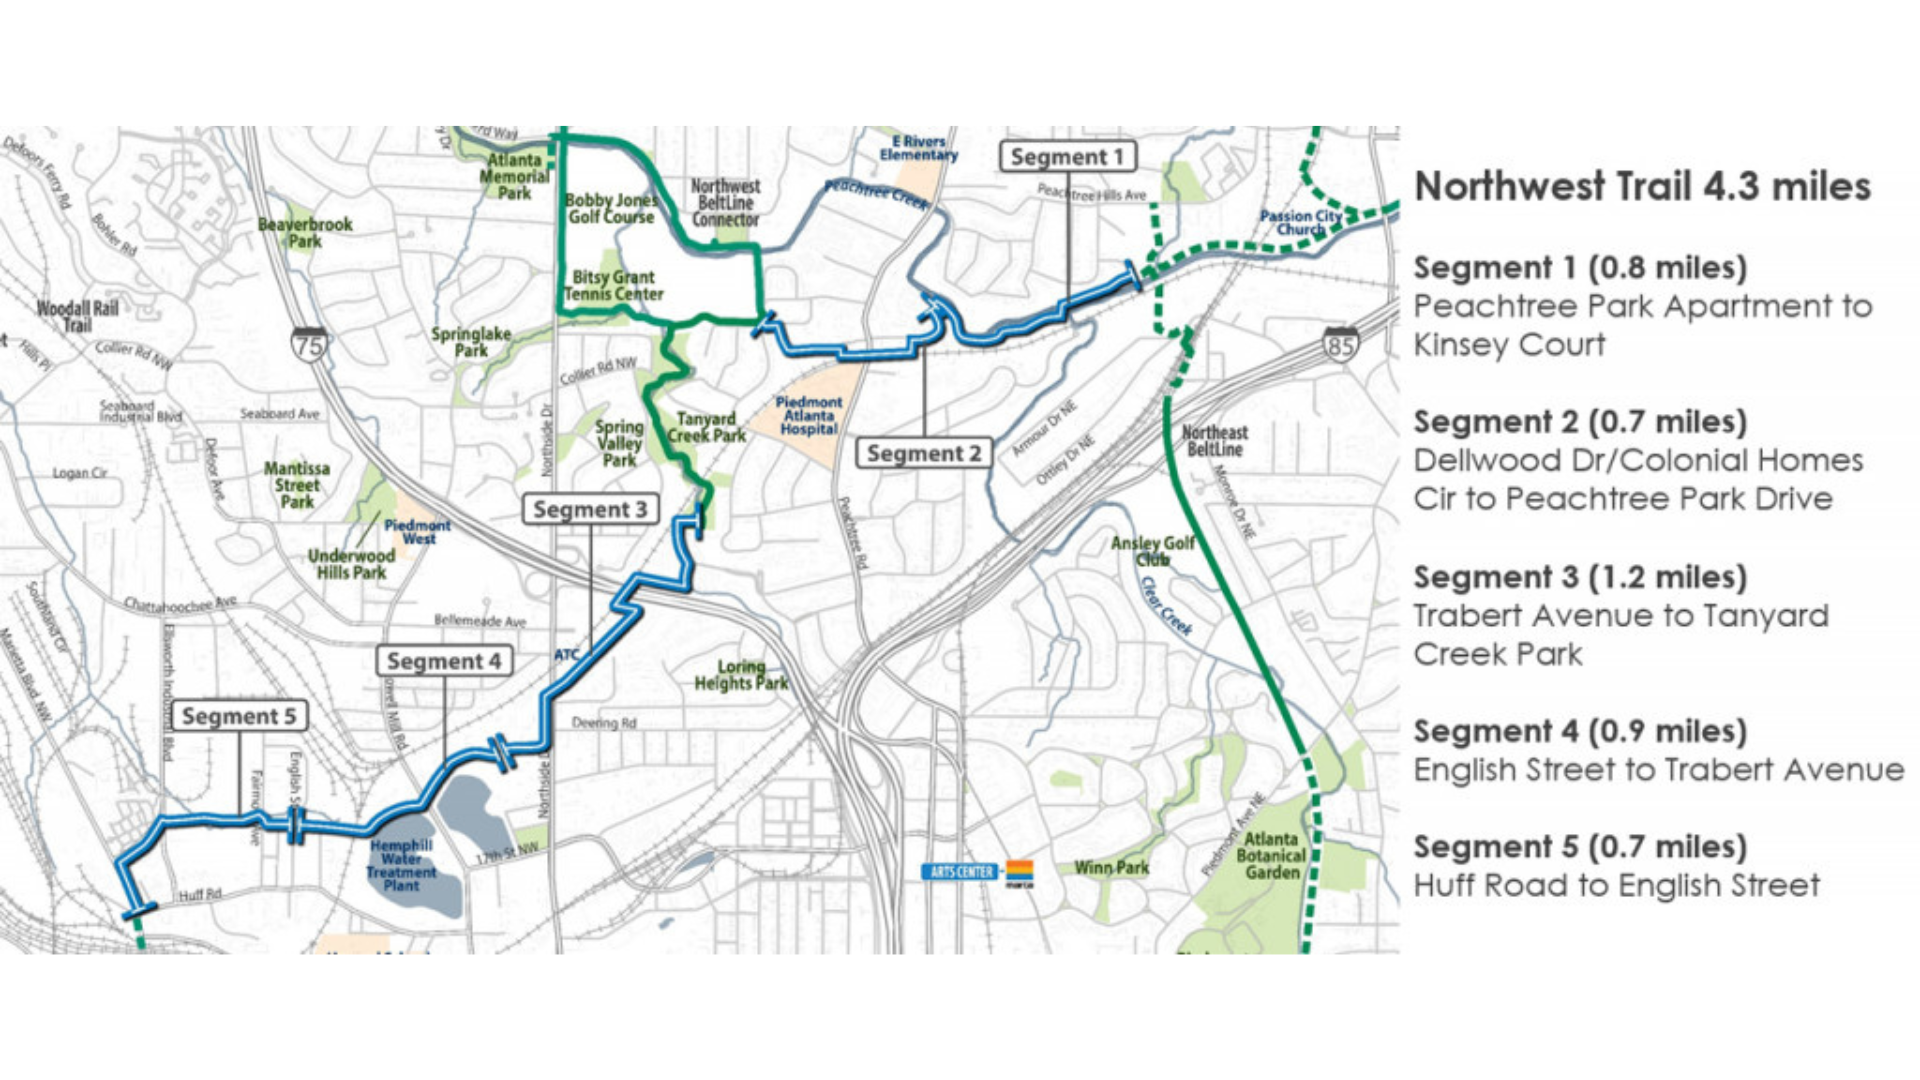 A map shows the five segments of the Northwest Trail.